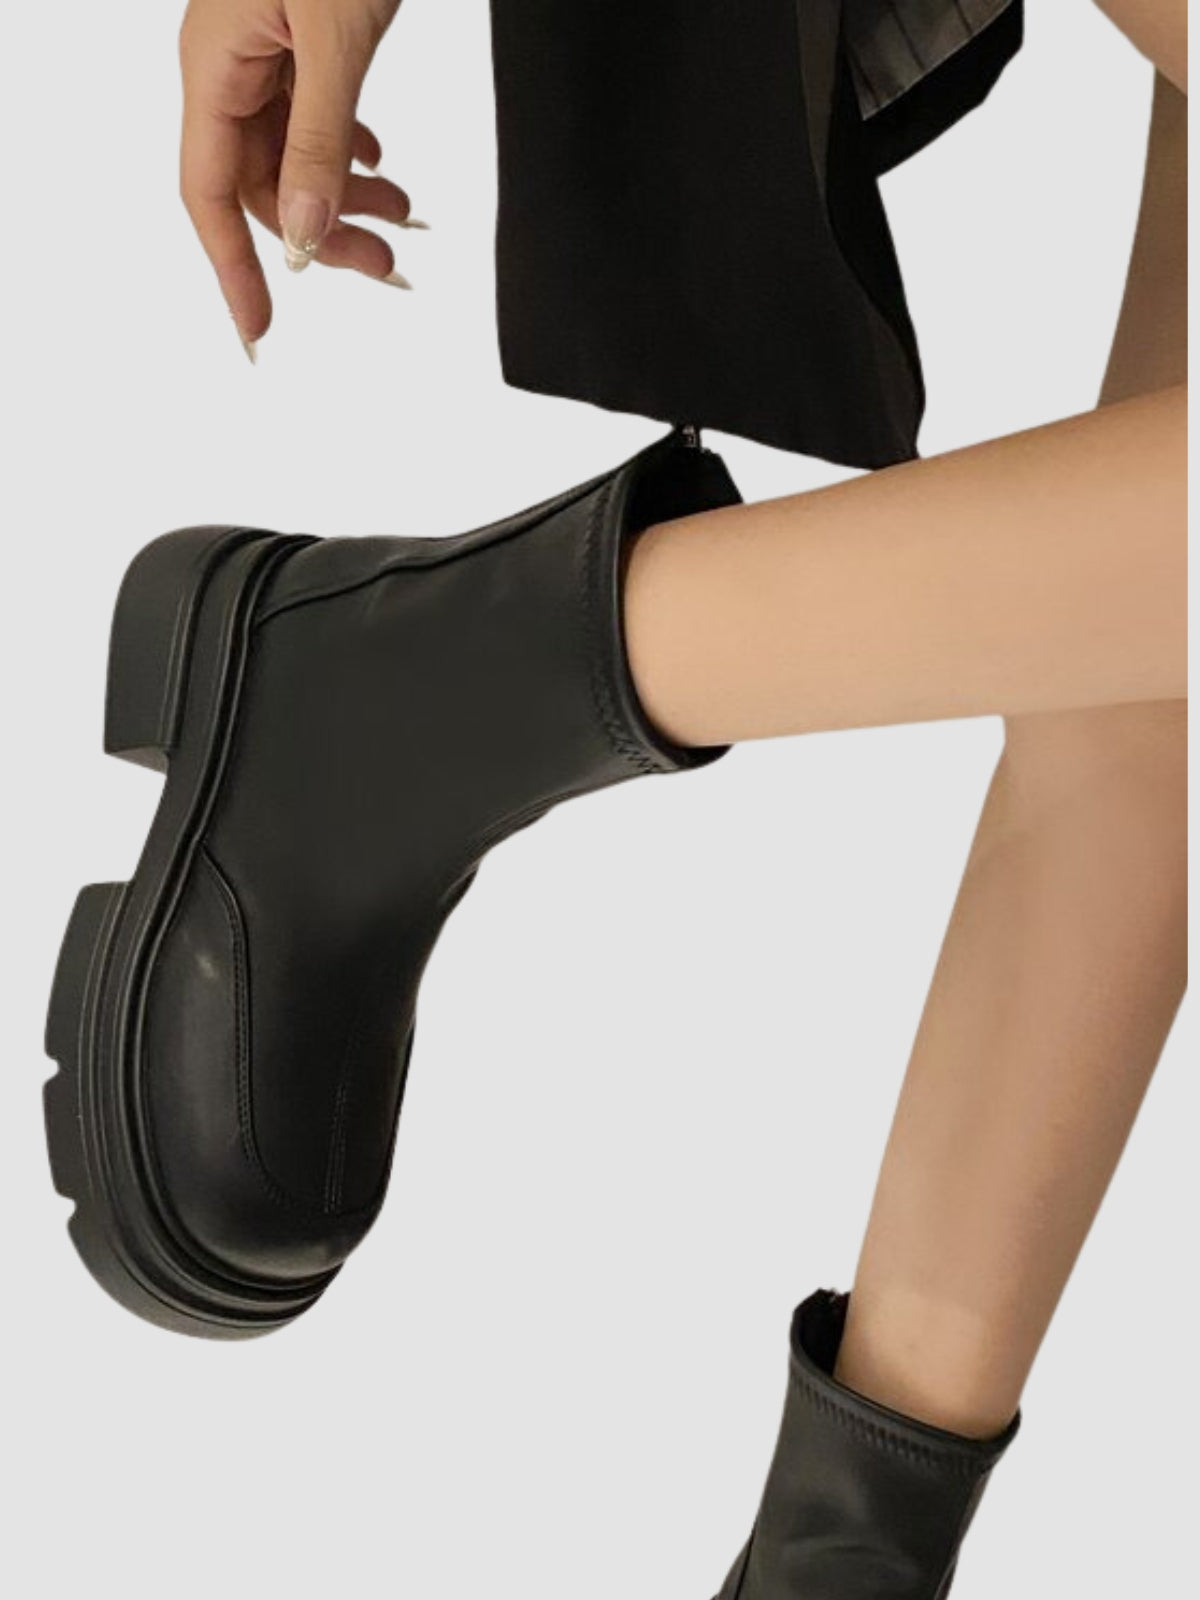 WLS Black Thick Soled Chic Slim Boots